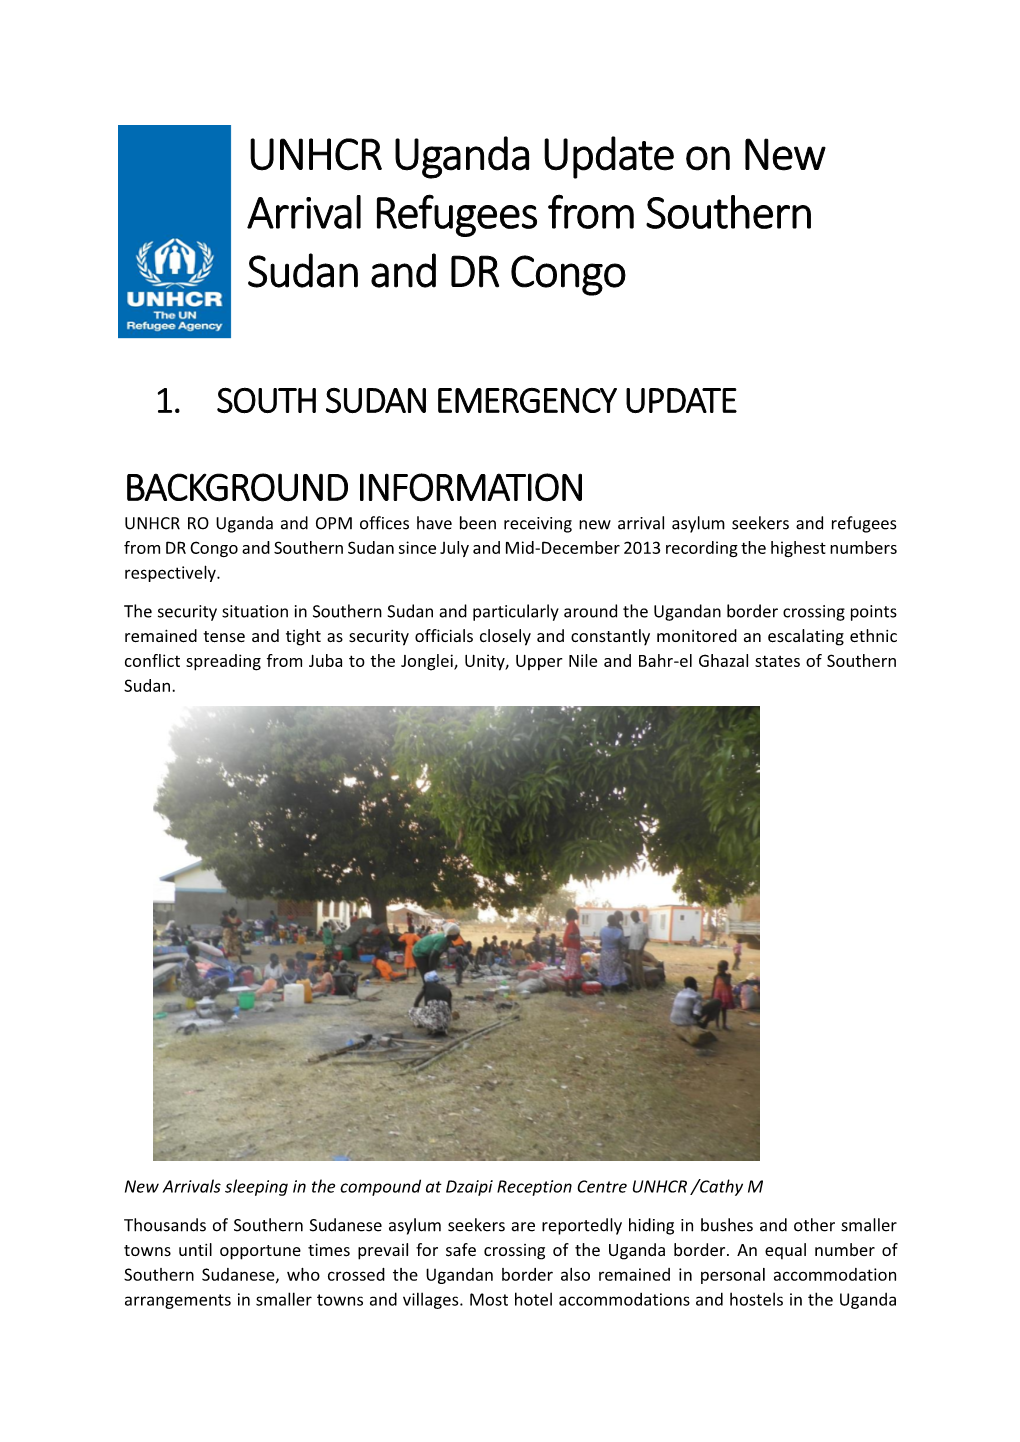 UNHCR Uganda Update on New Arrival Refugees from Southern Sudan and DR Congo